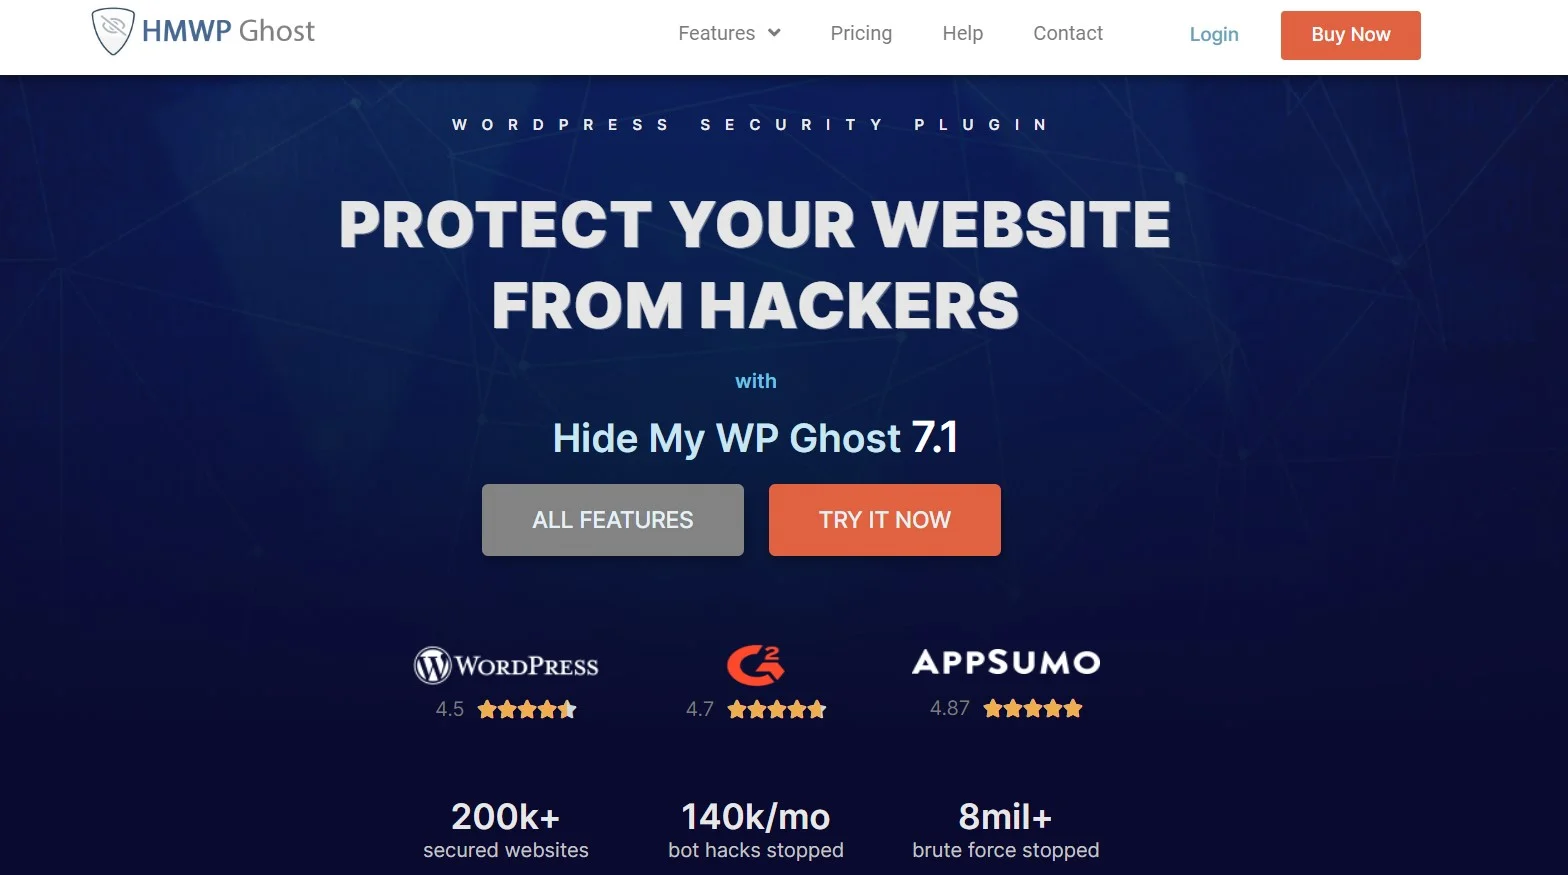 Hide My Wp Ghost Provides Robust Protection Against Brute Force Attacks, Ensuring The Safety Of Your Site